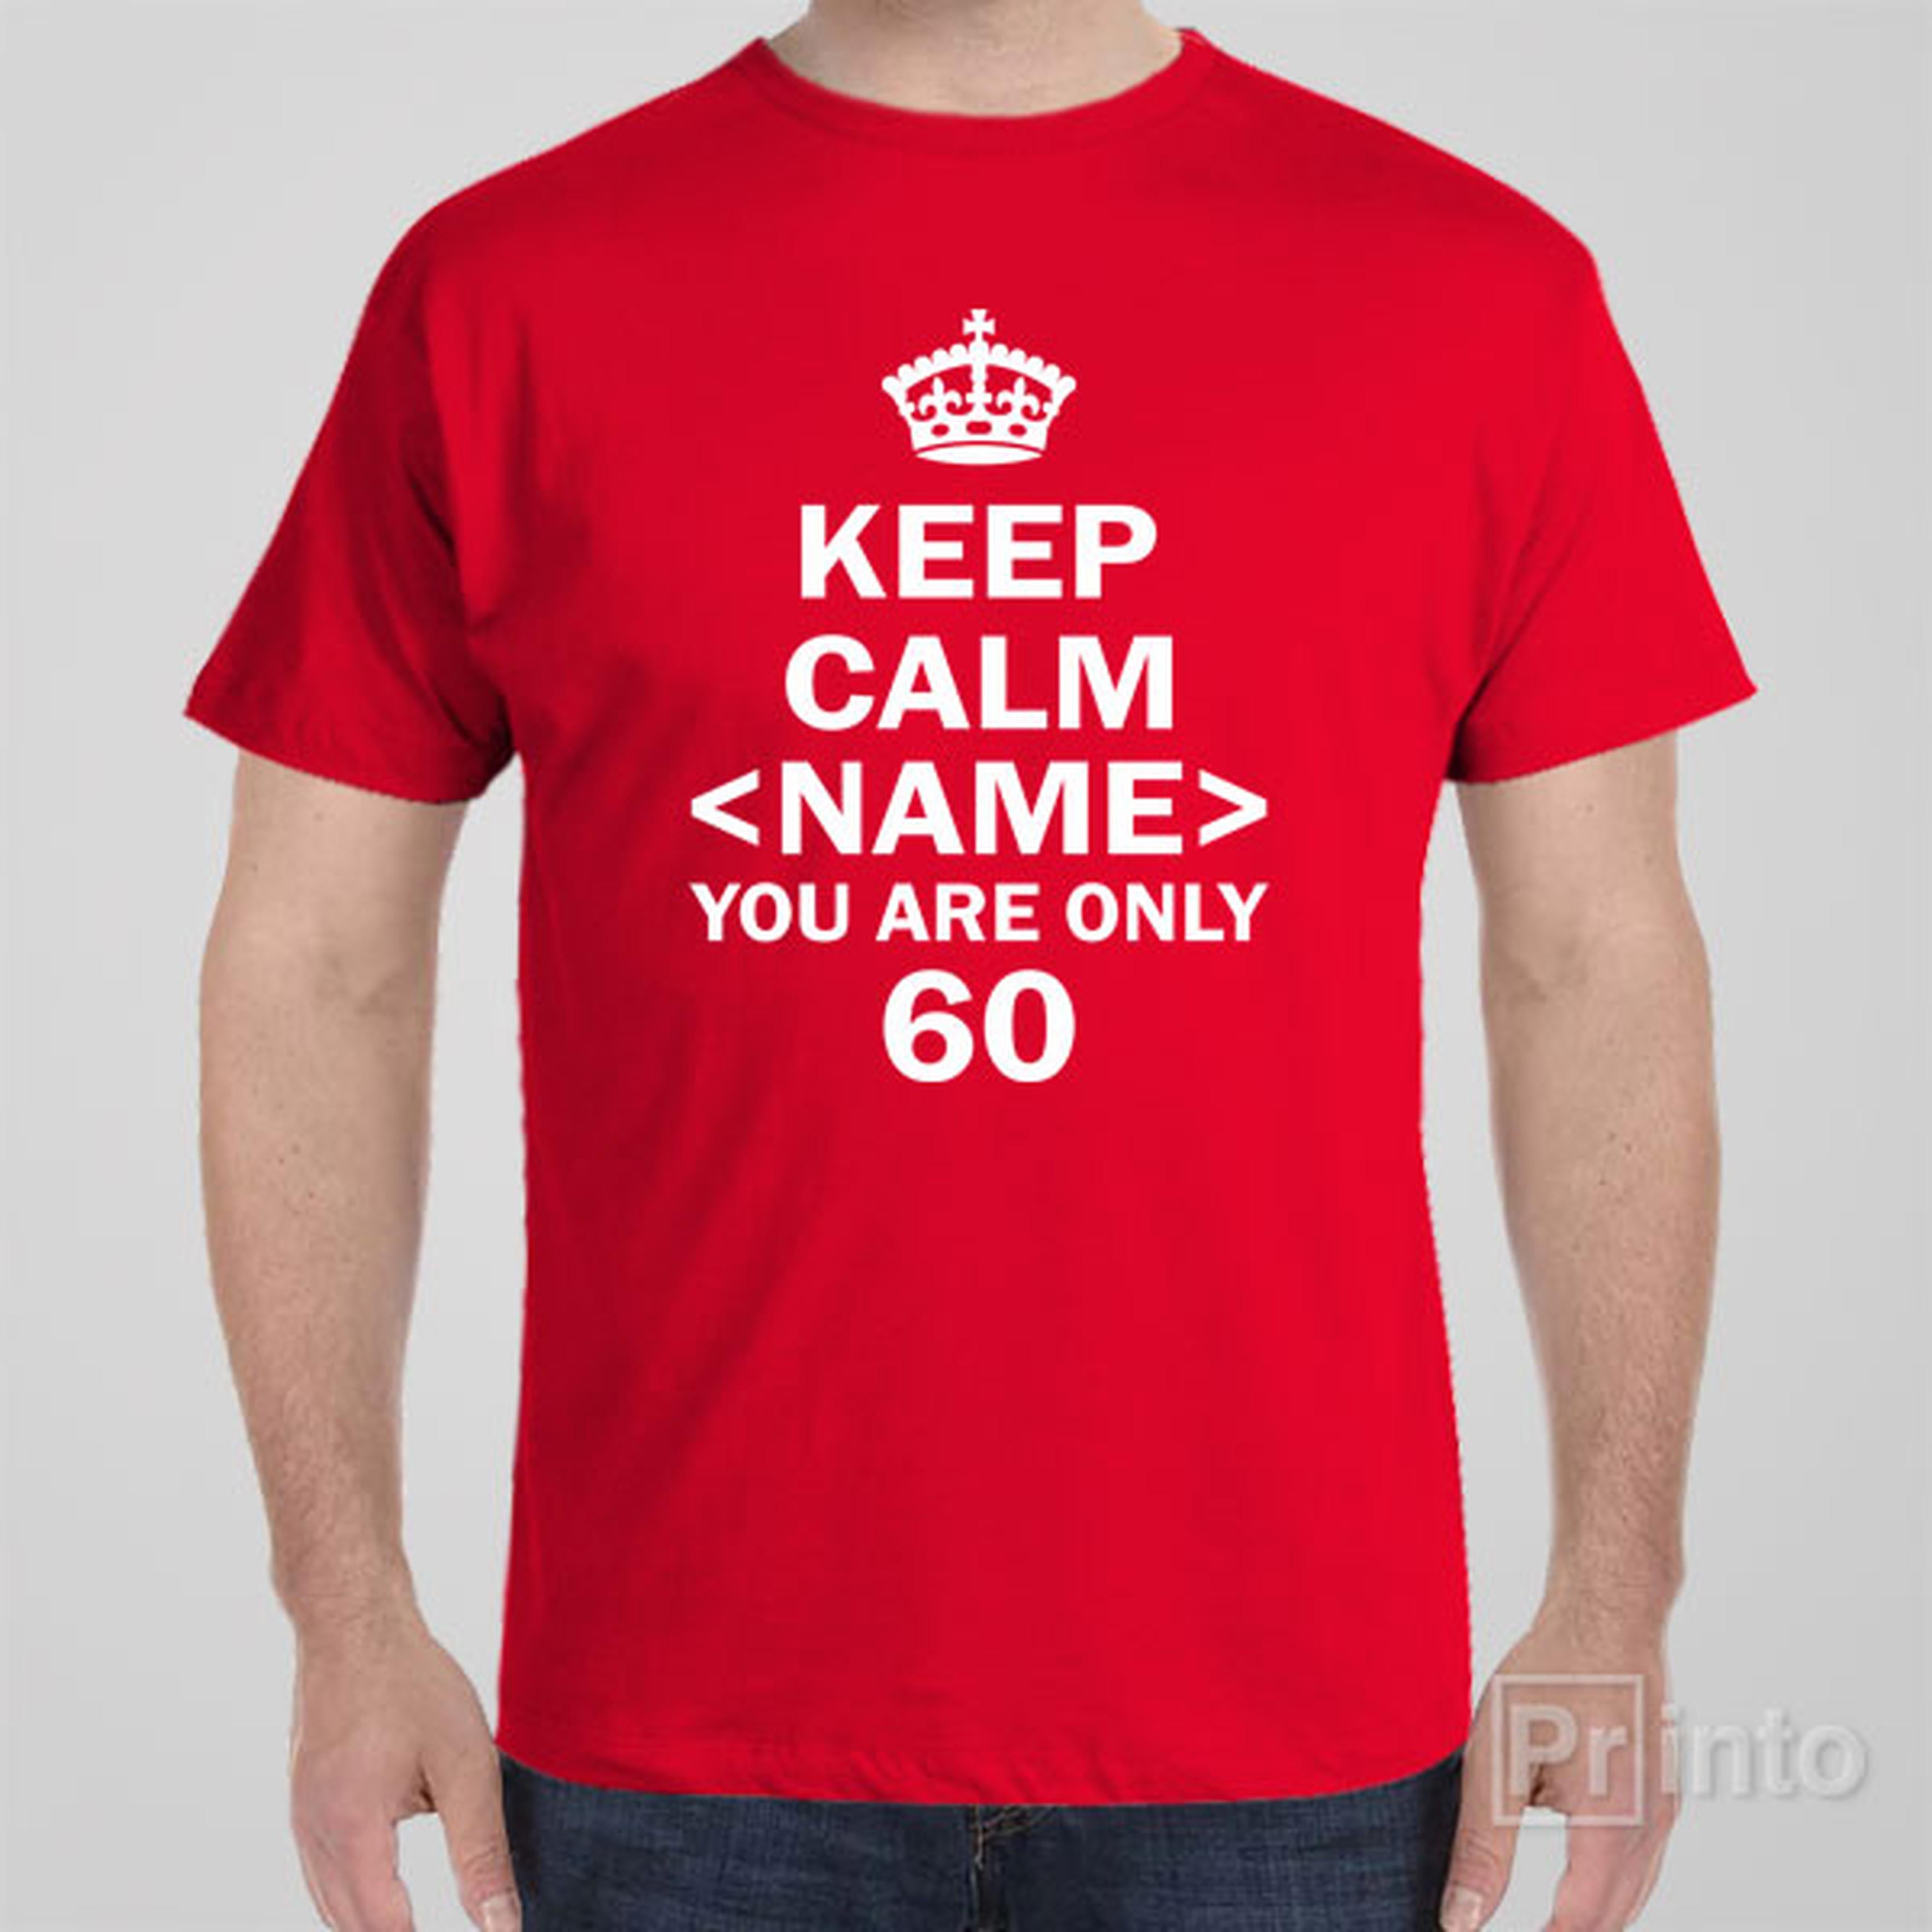 keep-calm-you-are-only-60-t-shirt